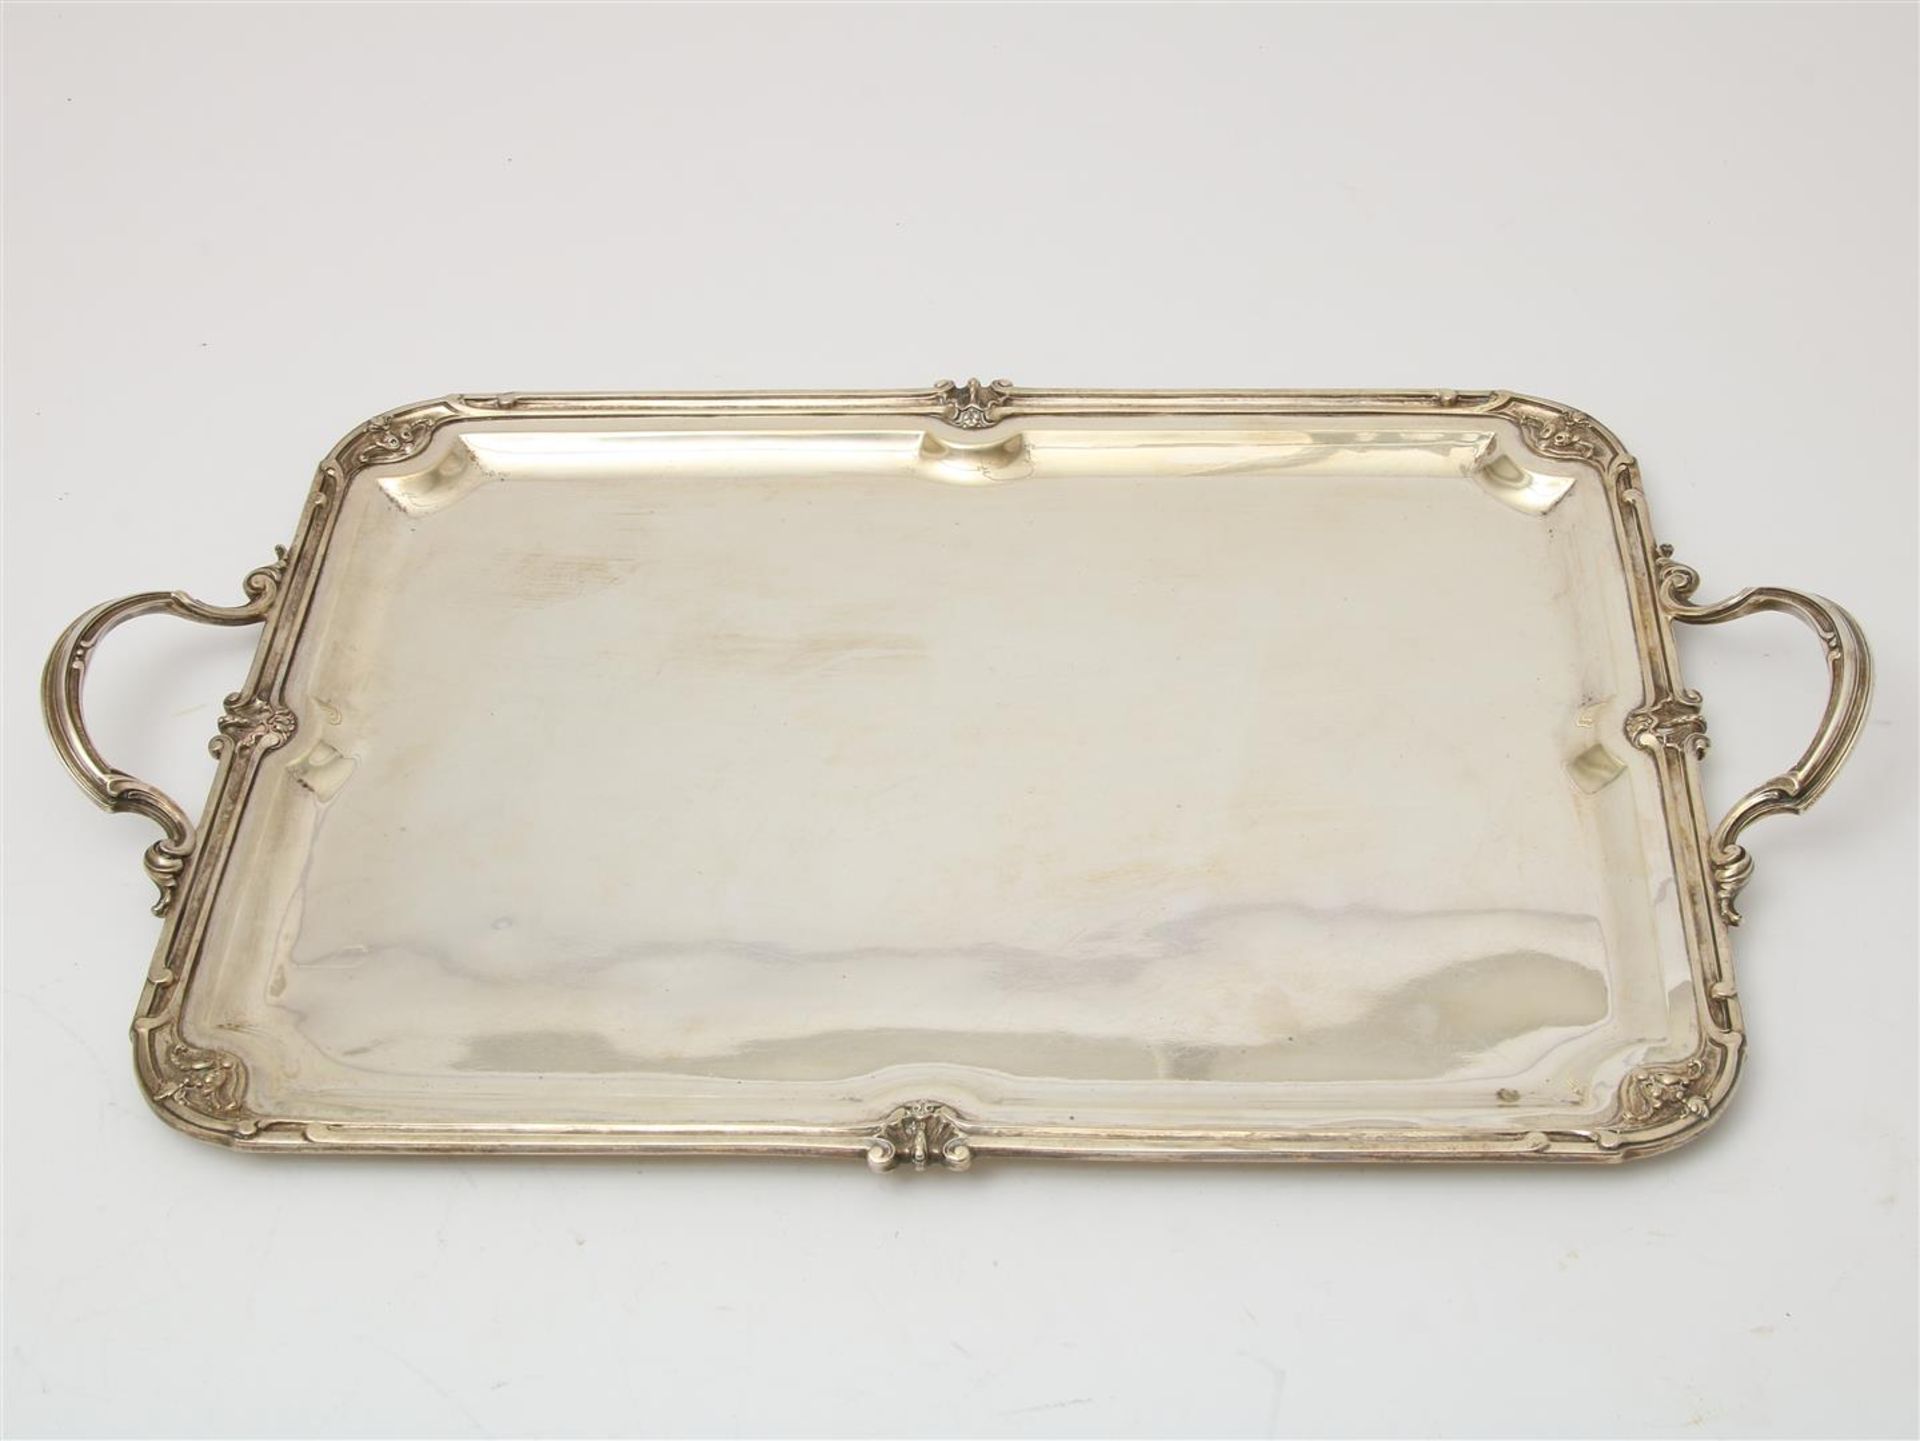 Silver tray with raised edge, fillet and shell motif, 2 handles, 62 x 39 cm. Including plated